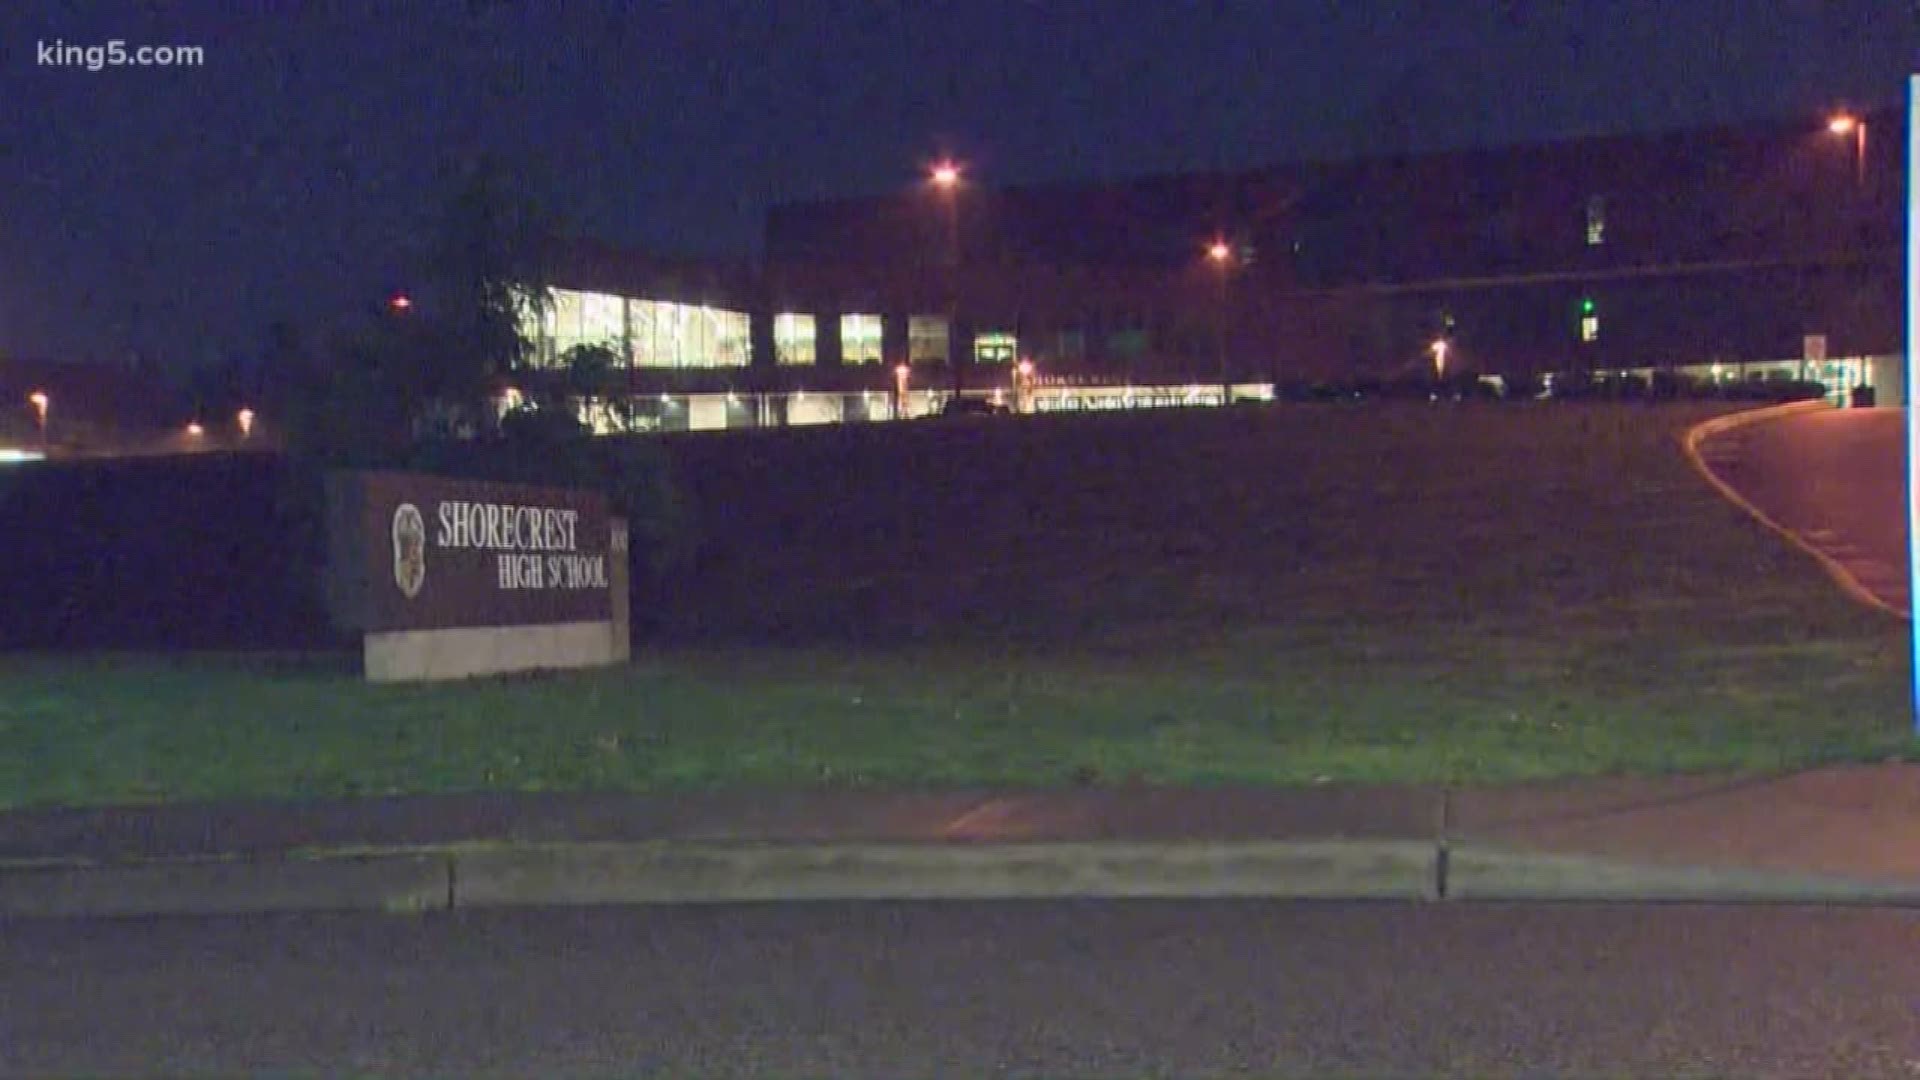 Shorecrest High School classes were canceled after school was locked down on Monday followed by another potential threat.